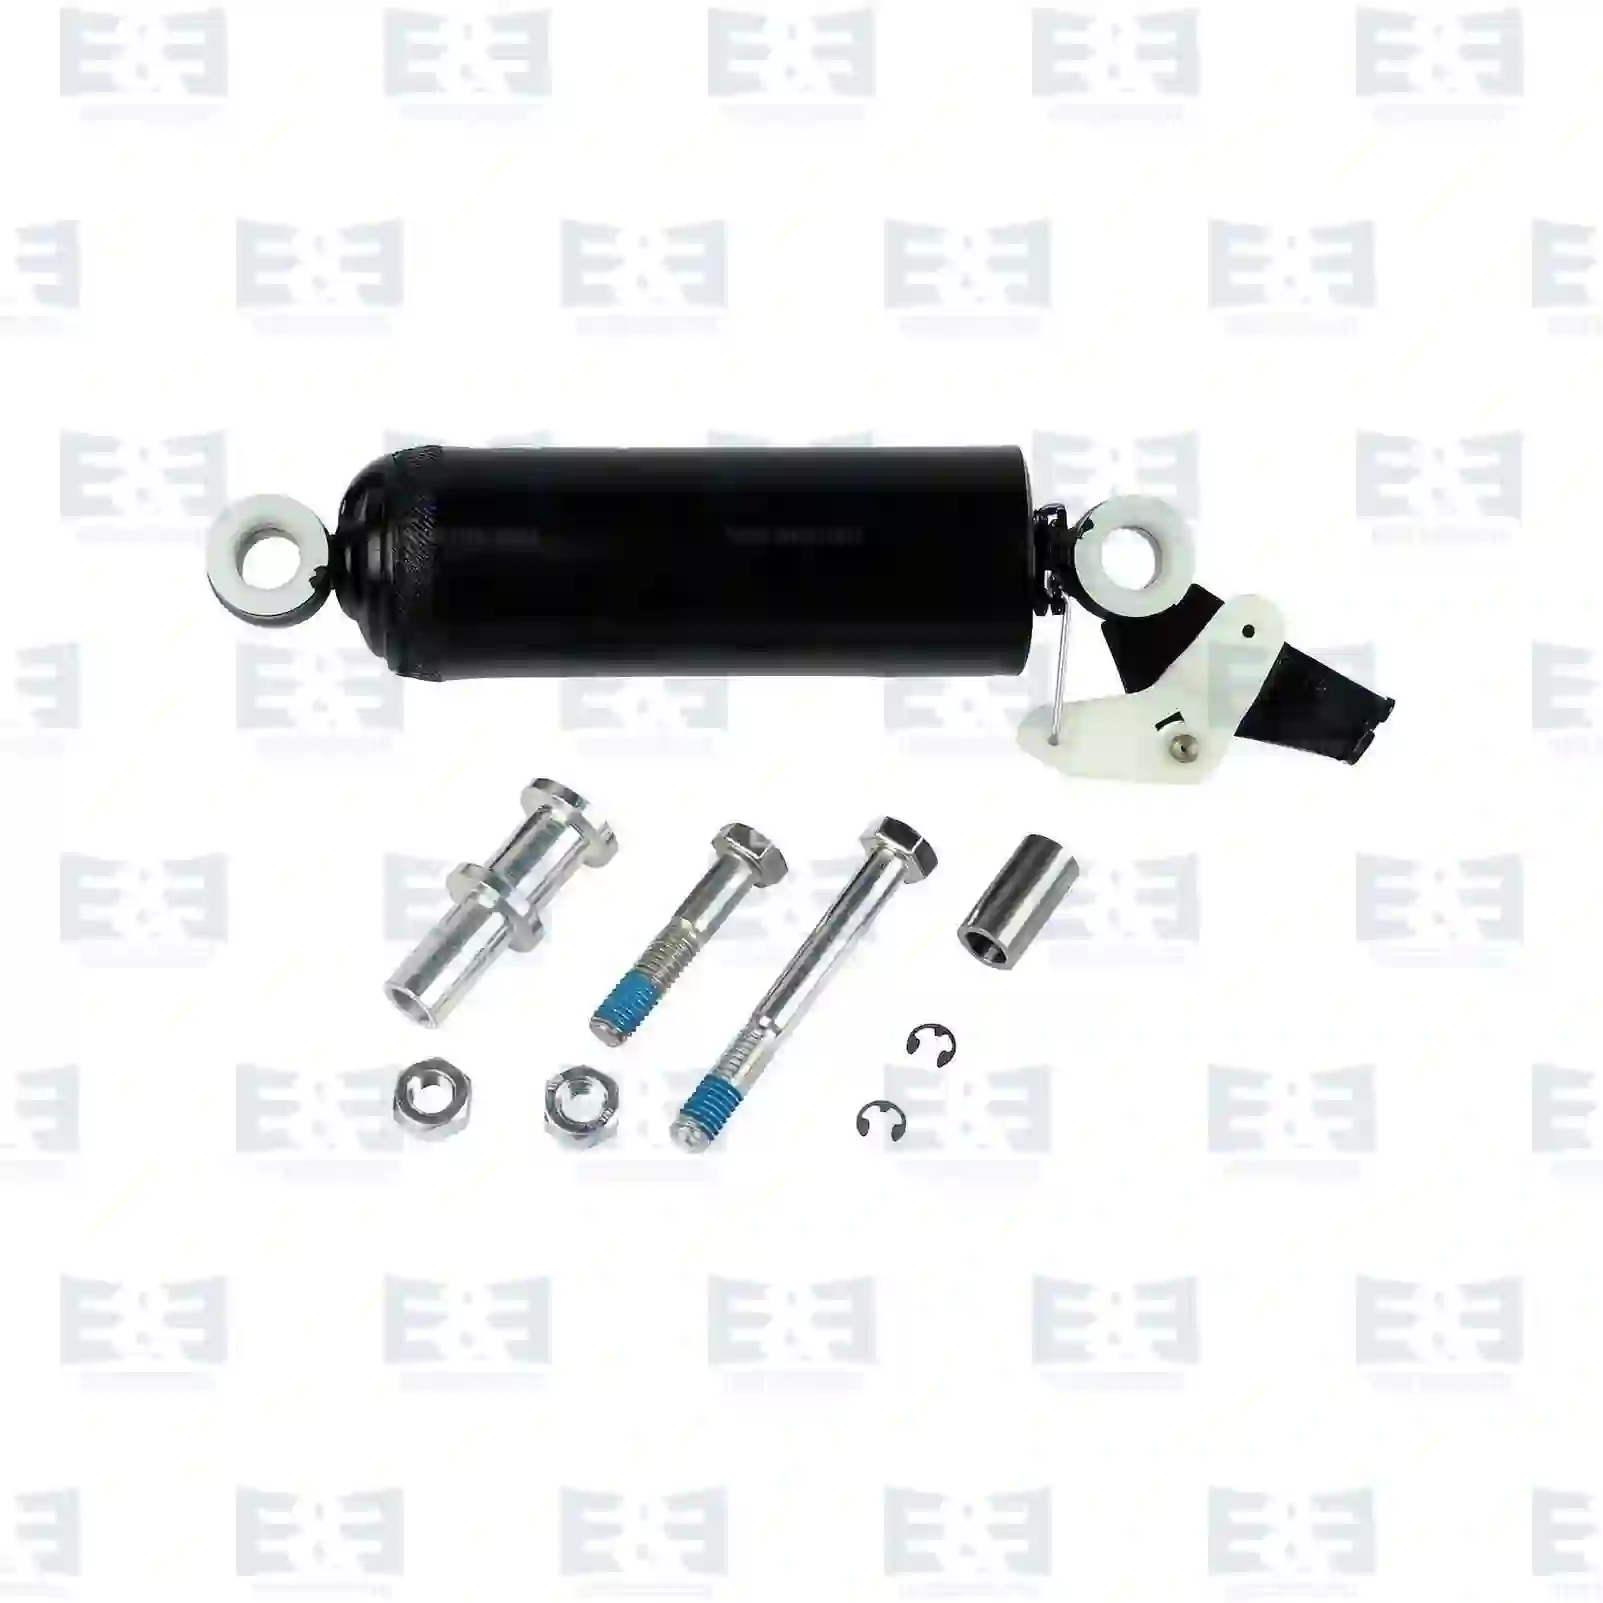 Shock absorber, seat, without accessories, 2E2276226, 0019191245, 5001857903, 1498862, 2438272, 20443547, ZG41656-0008 ||  2E2276226 E&E Truck Spare Parts | Truck Spare Parts, Auotomotive Spare Parts Shock absorber, seat, without accessories, 2E2276226, 0019191245, 5001857903, 1498862, 2438272, 20443547, ZG41656-0008 ||  2E2276226 E&E Truck Spare Parts | Truck Spare Parts, Auotomotive Spare Parts